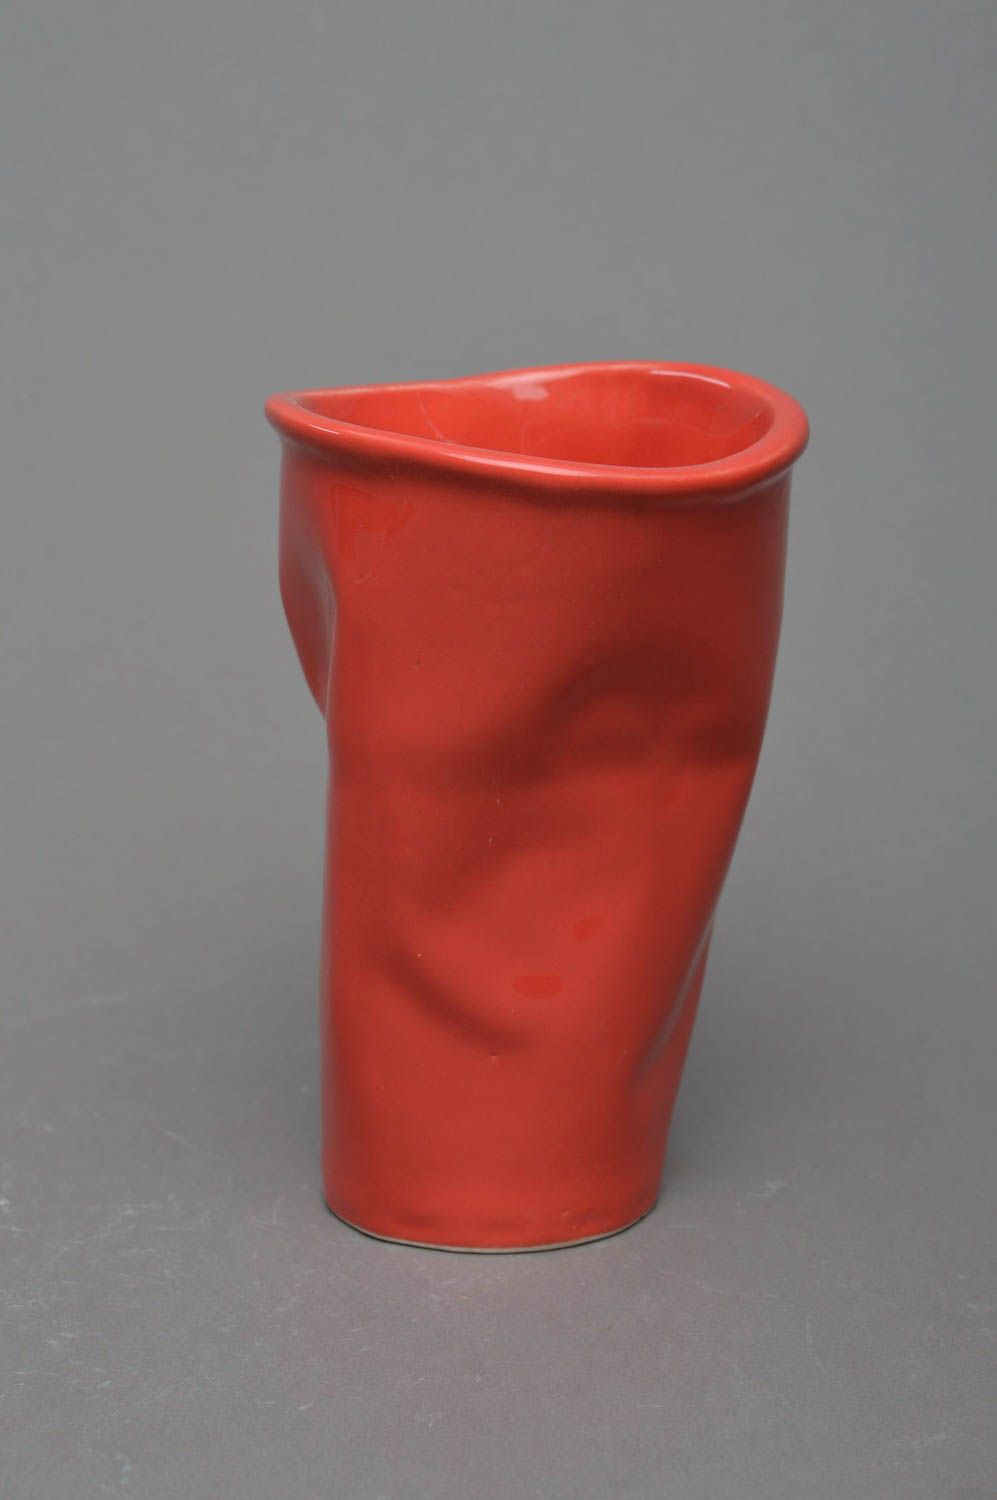 Porcelain red color fake plastic crinkled cup with no handle photo 2